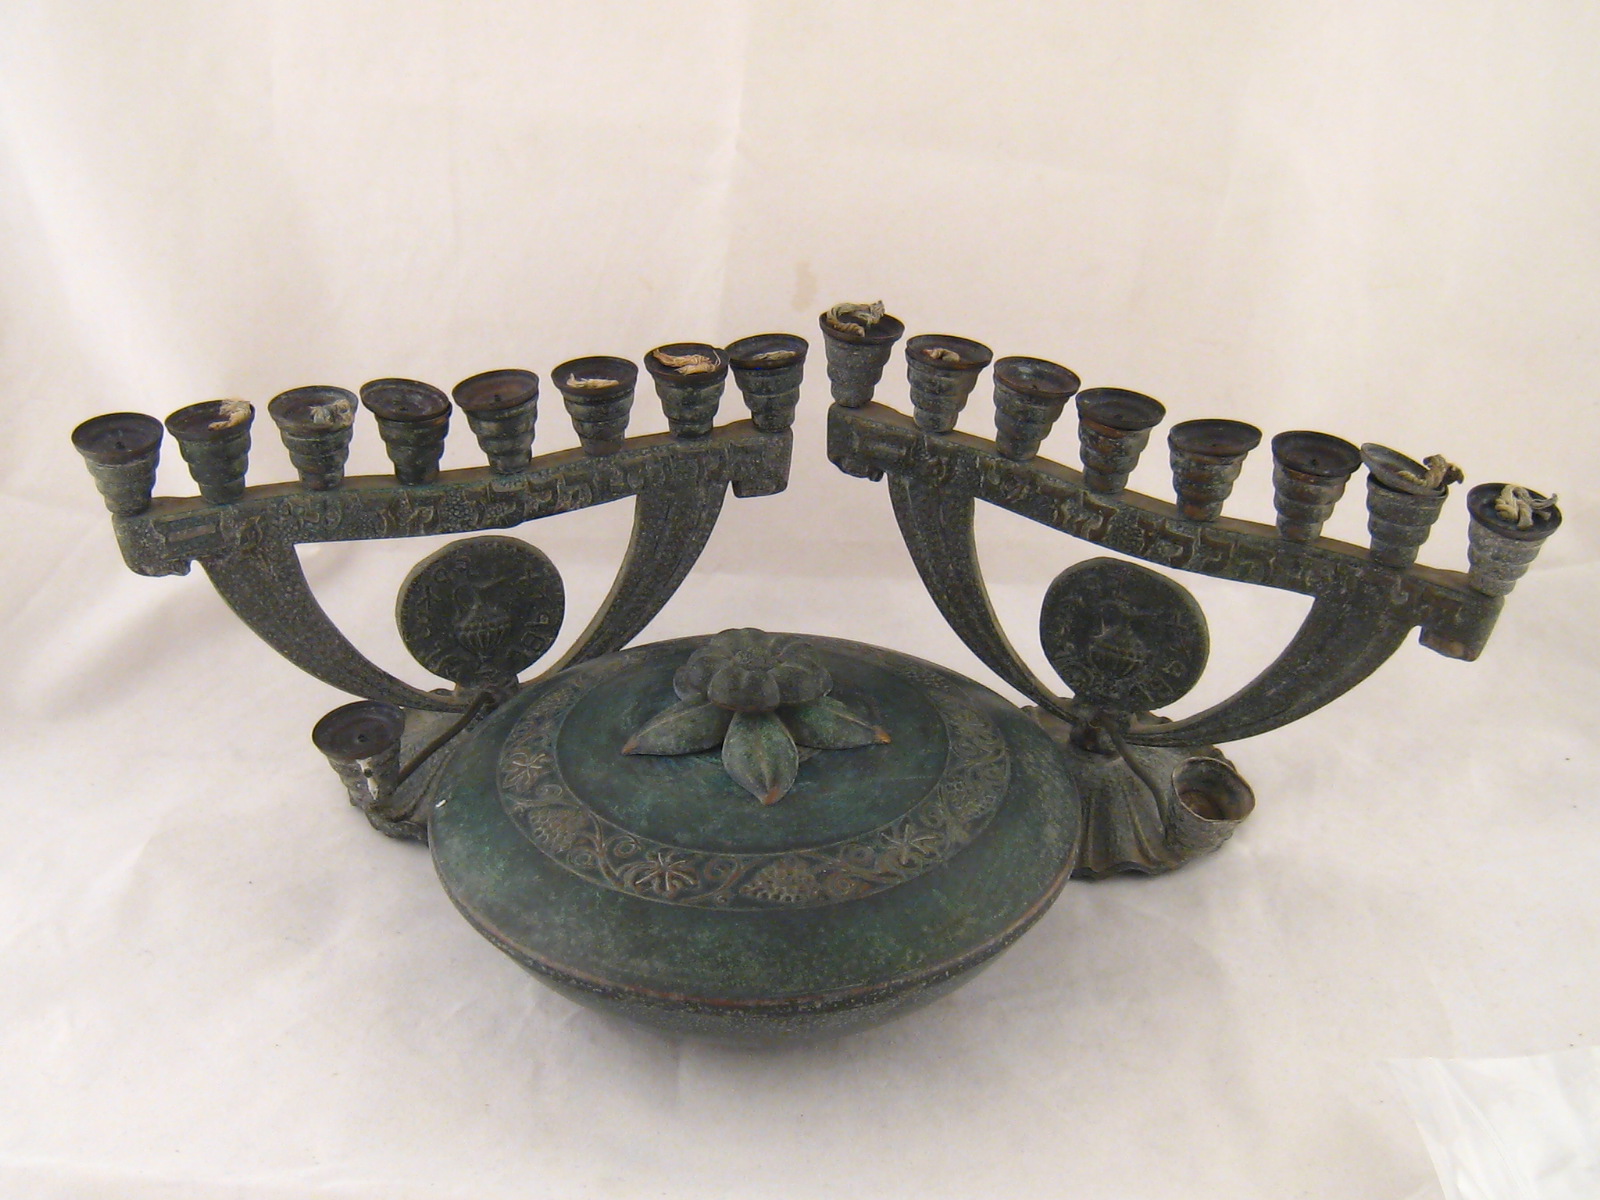 Two brass chanukia, both complete with covers and wicks, and a covered bowl, 18cm. dia.